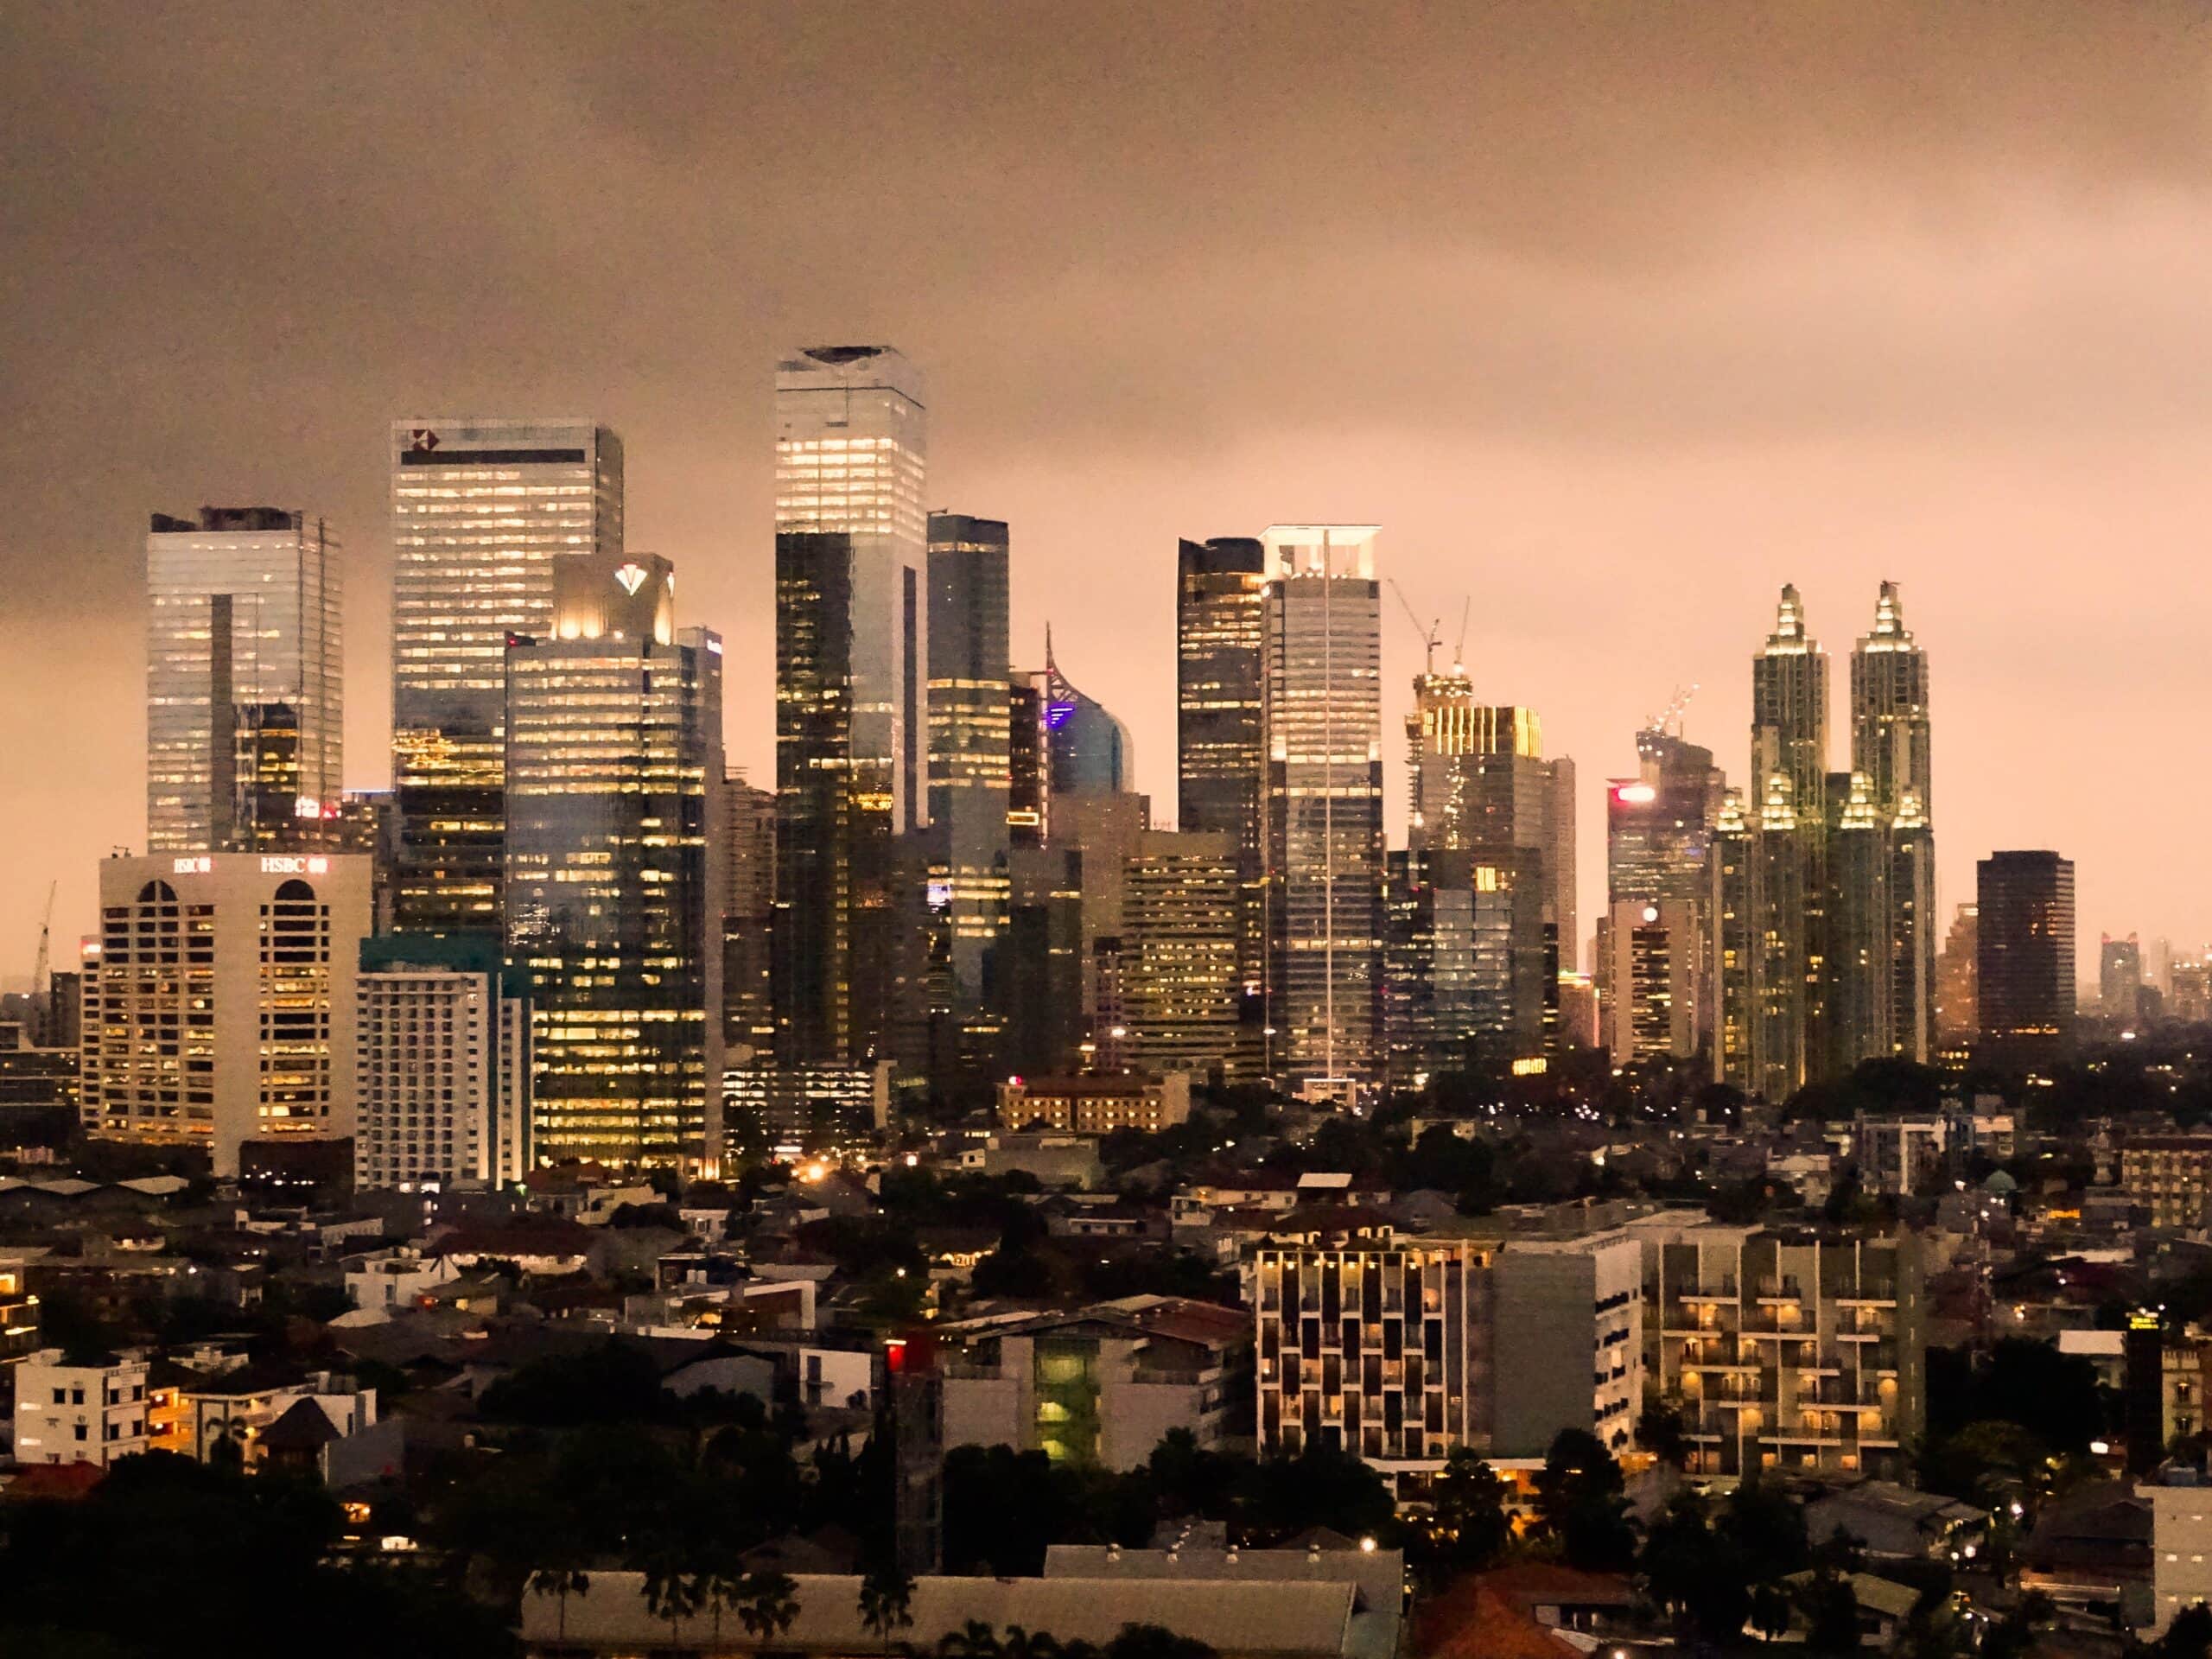 Jakarta city in the evening